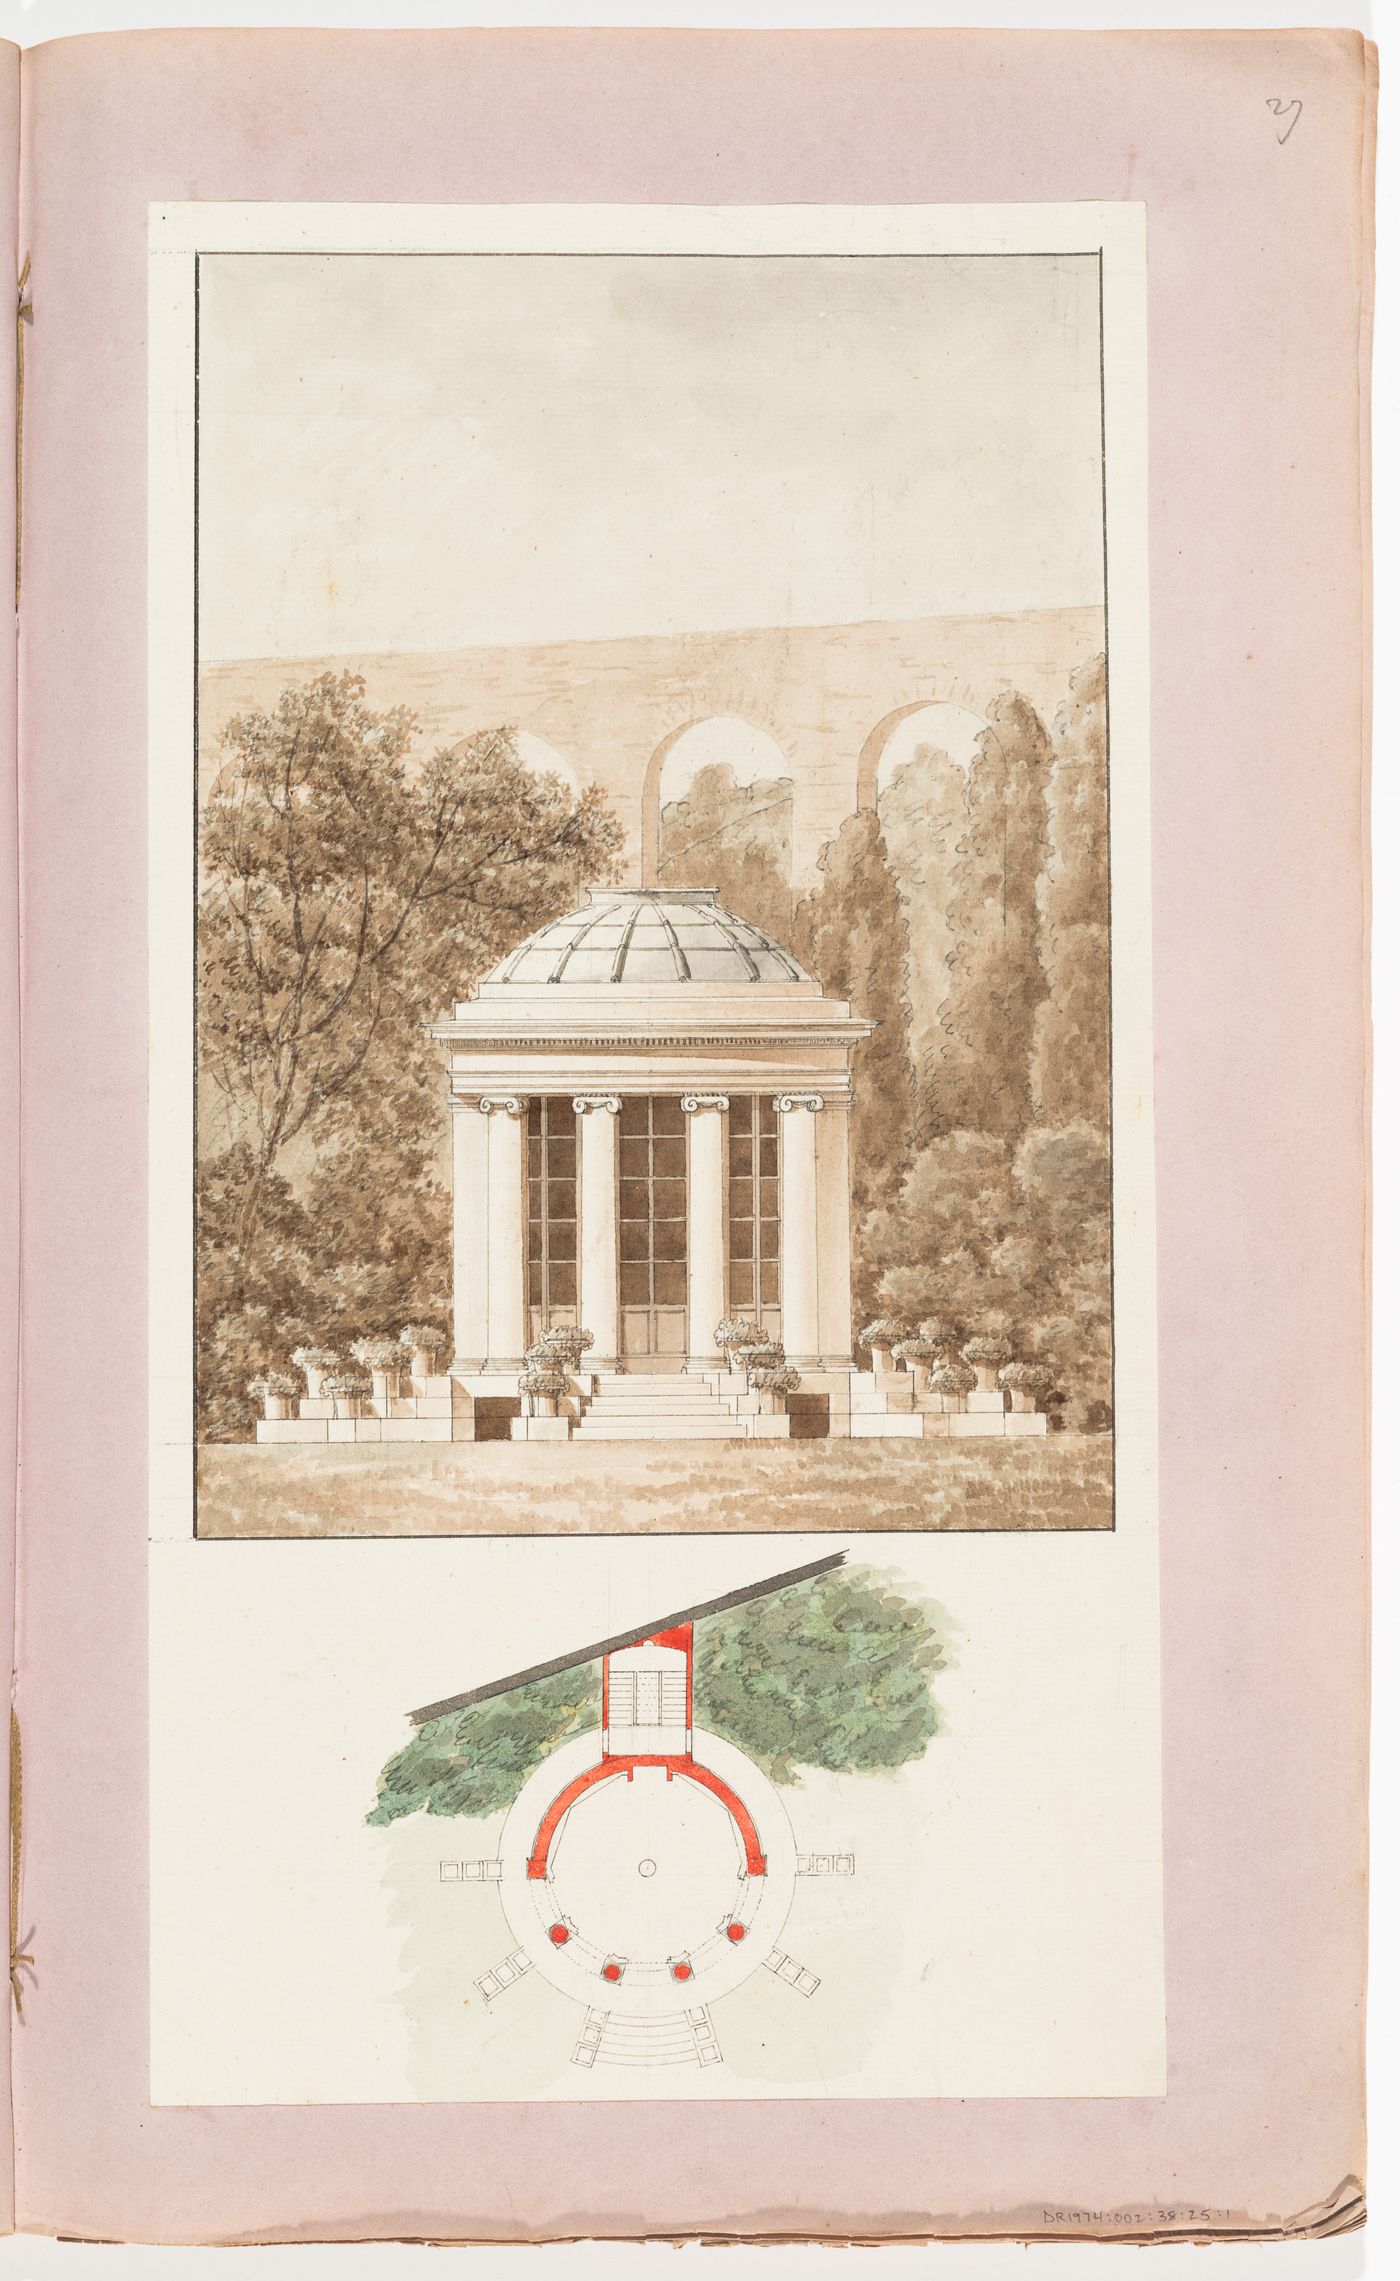 Elevation and plan for a garden pavilion